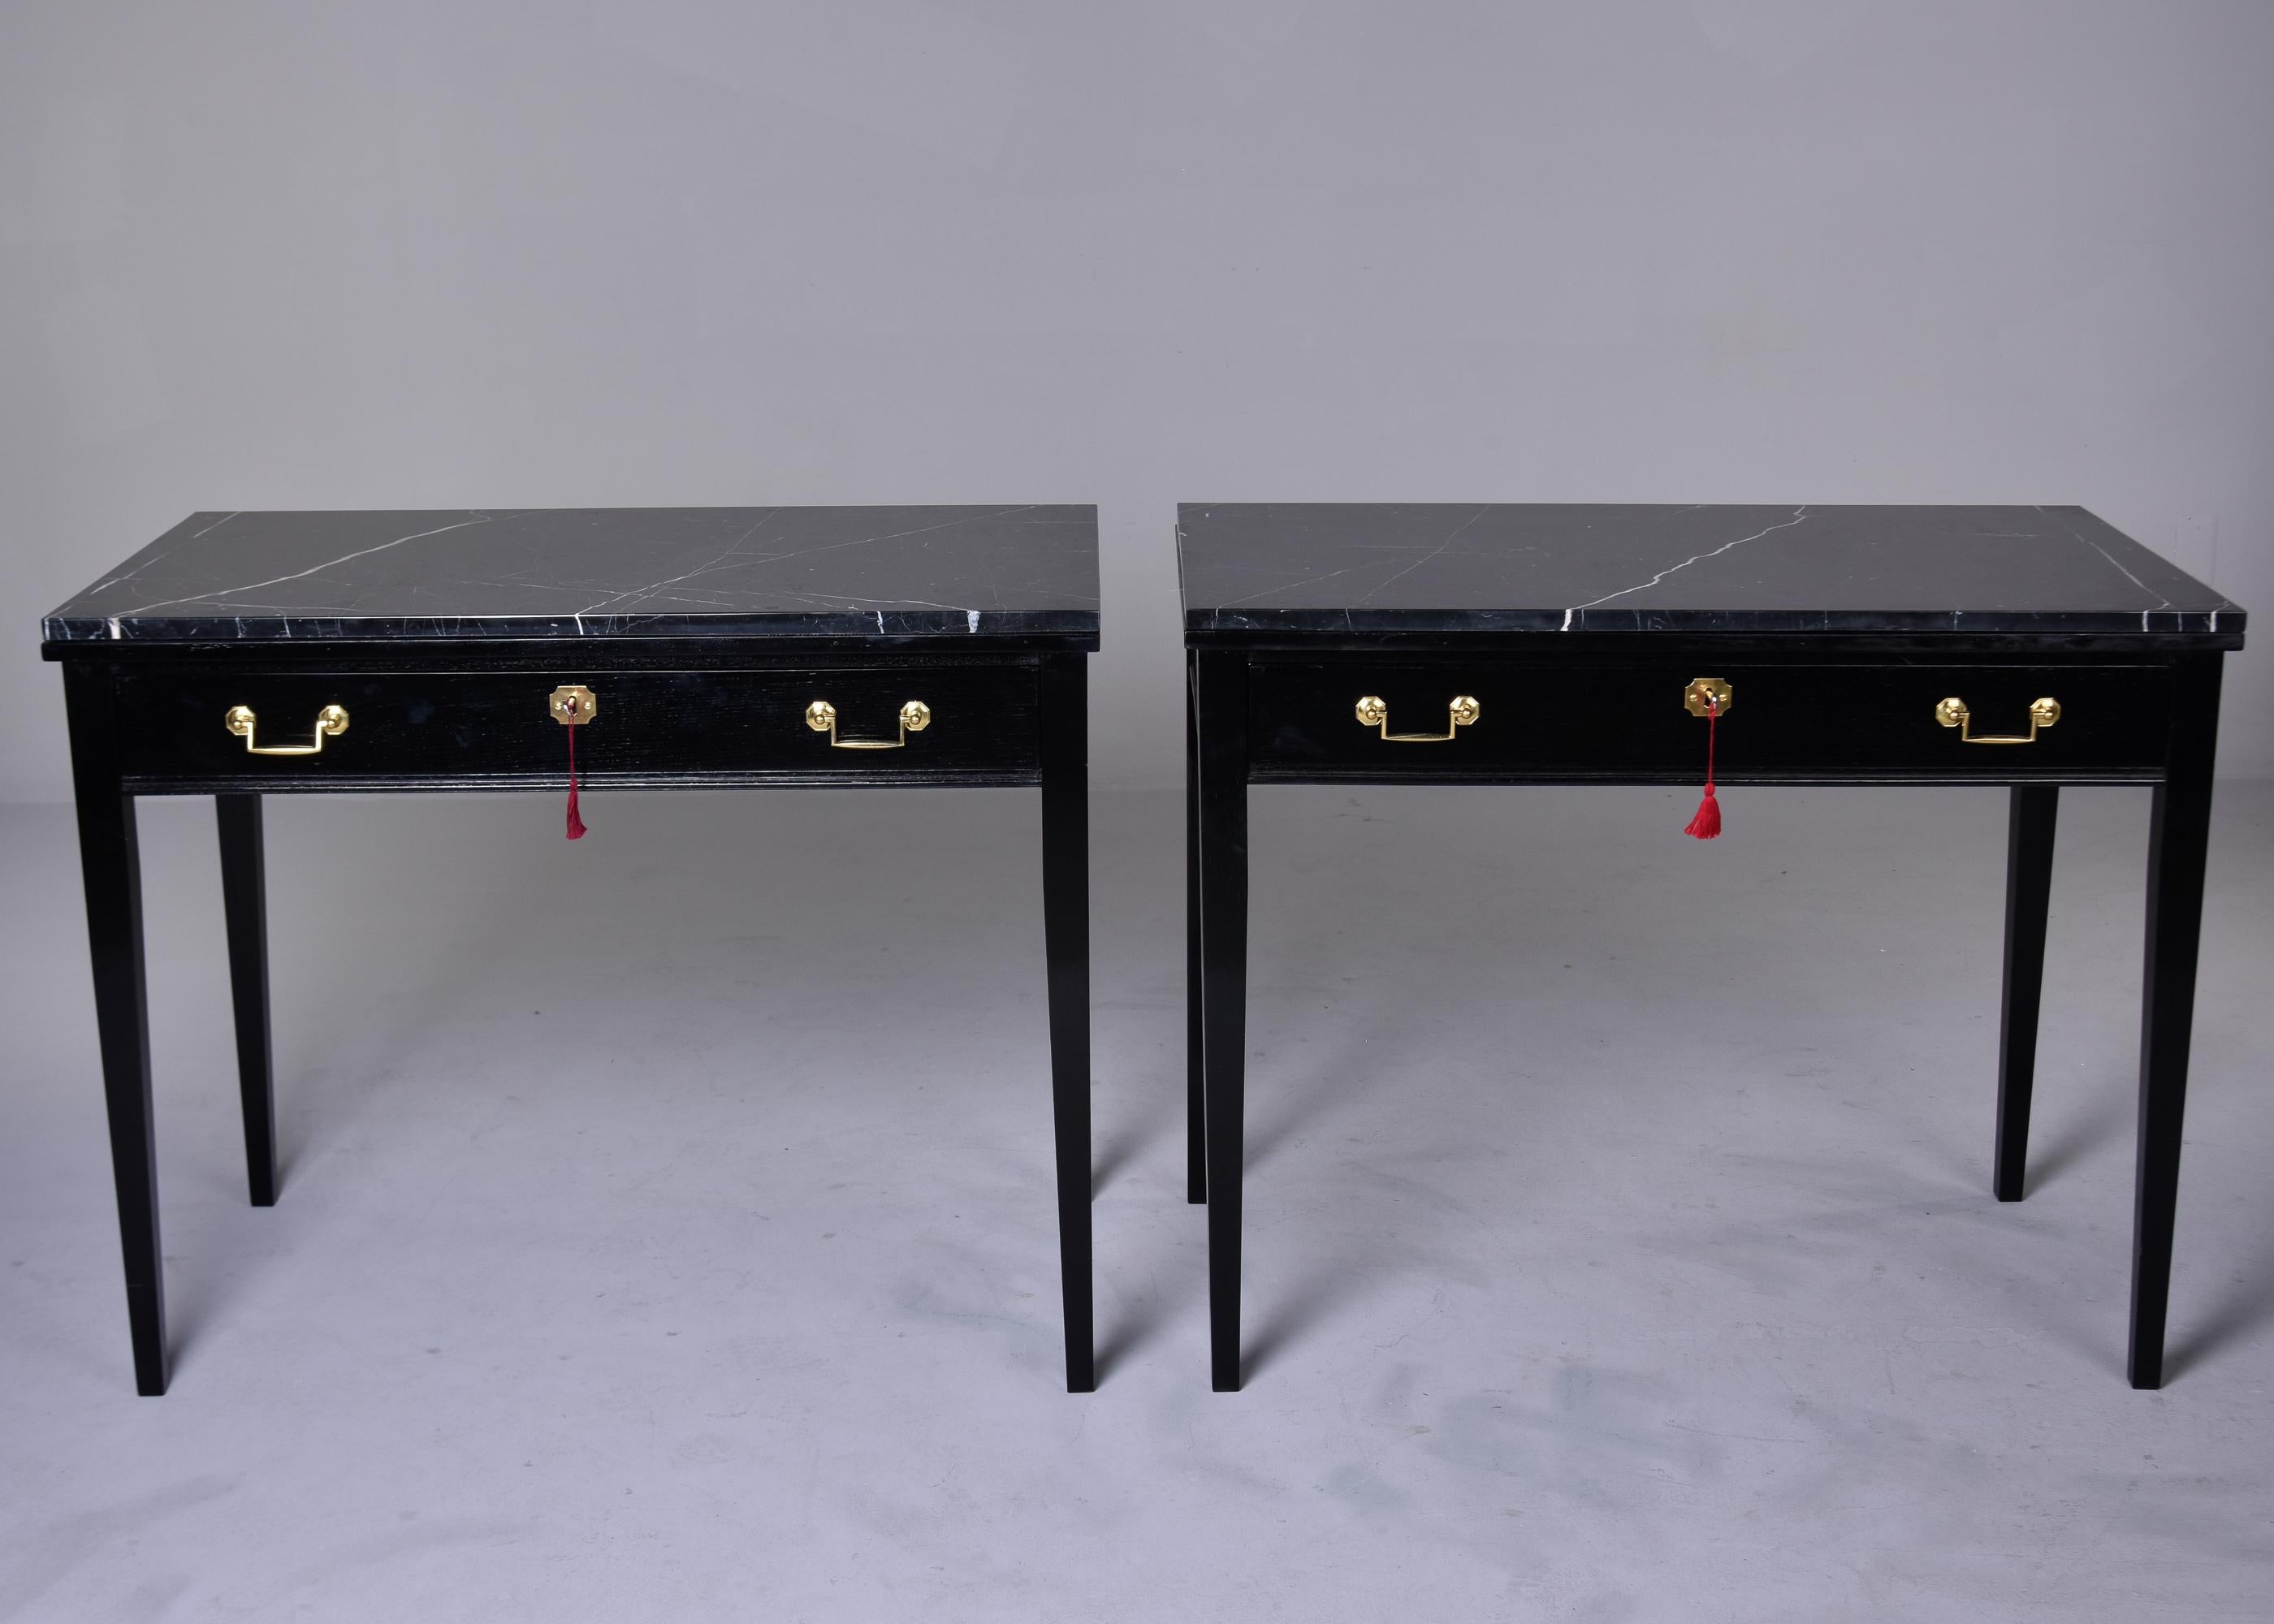 Circa 1900 pair of English writing desks with single locking center drawer and newly ebonised finish. Dovetail construction. Each desk has a new black marble top with white streaks. These pieces can also work as consoles or side tables. Unknown